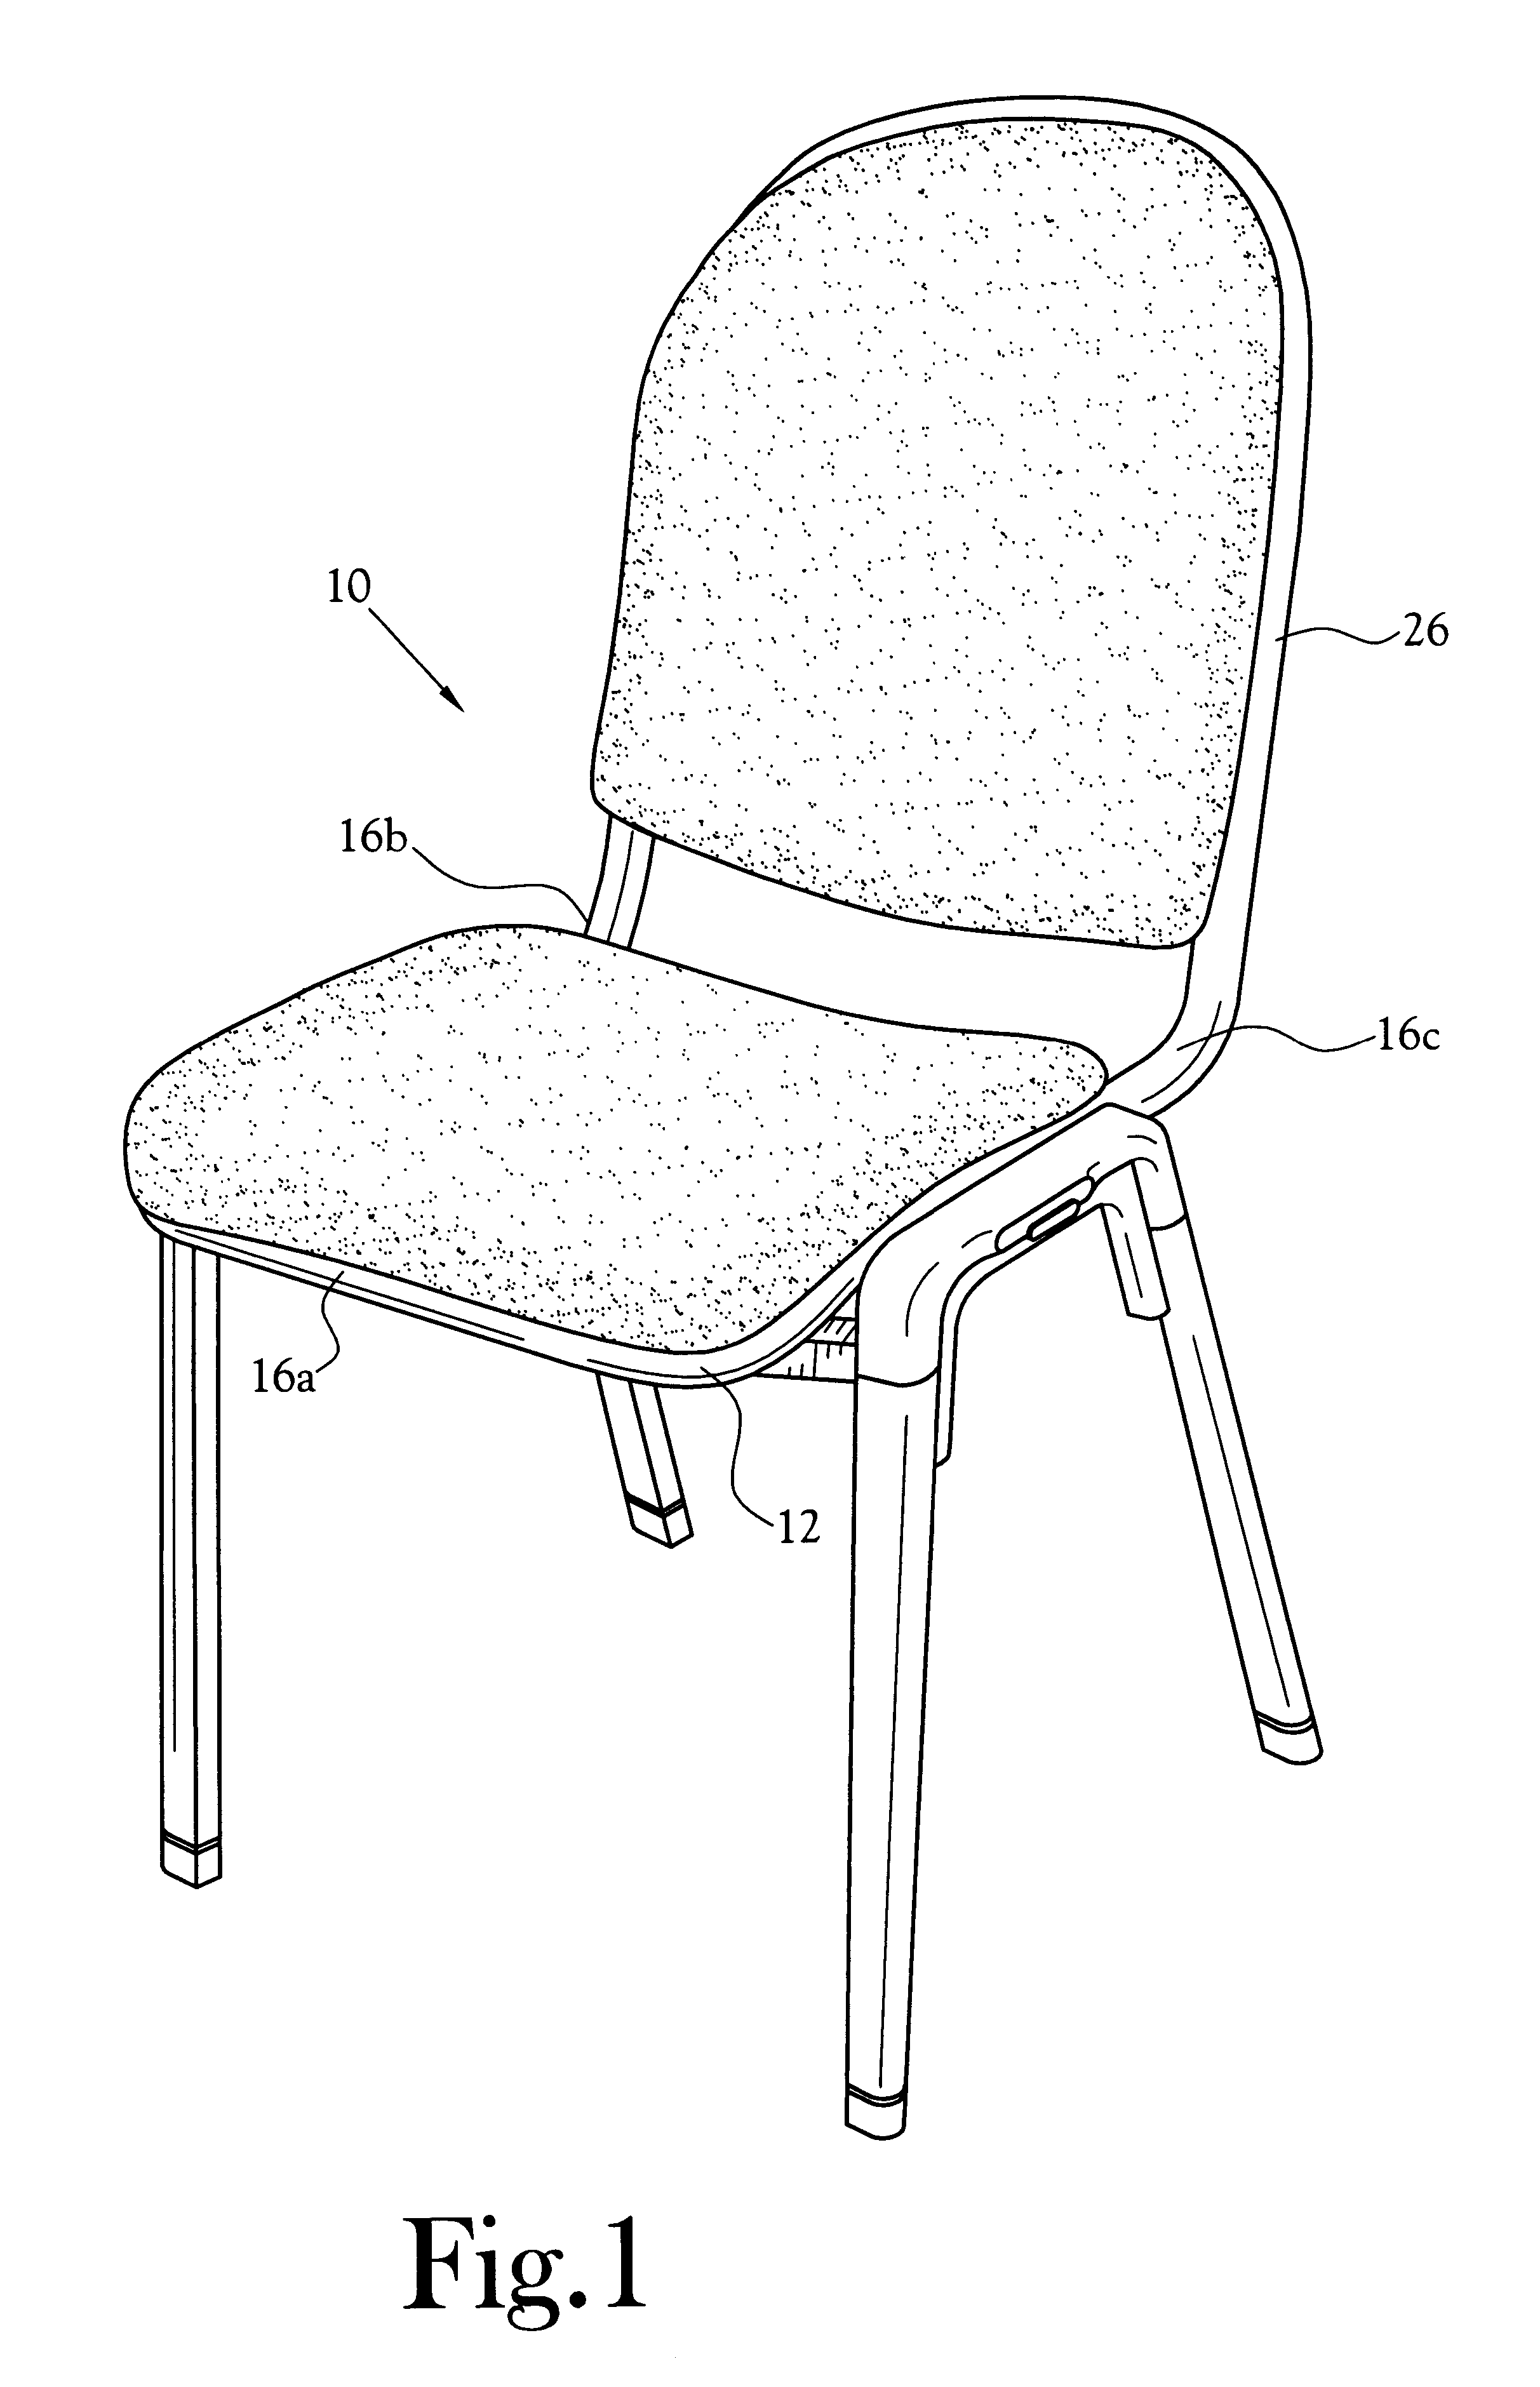 Stackable side-by-side ganging chair